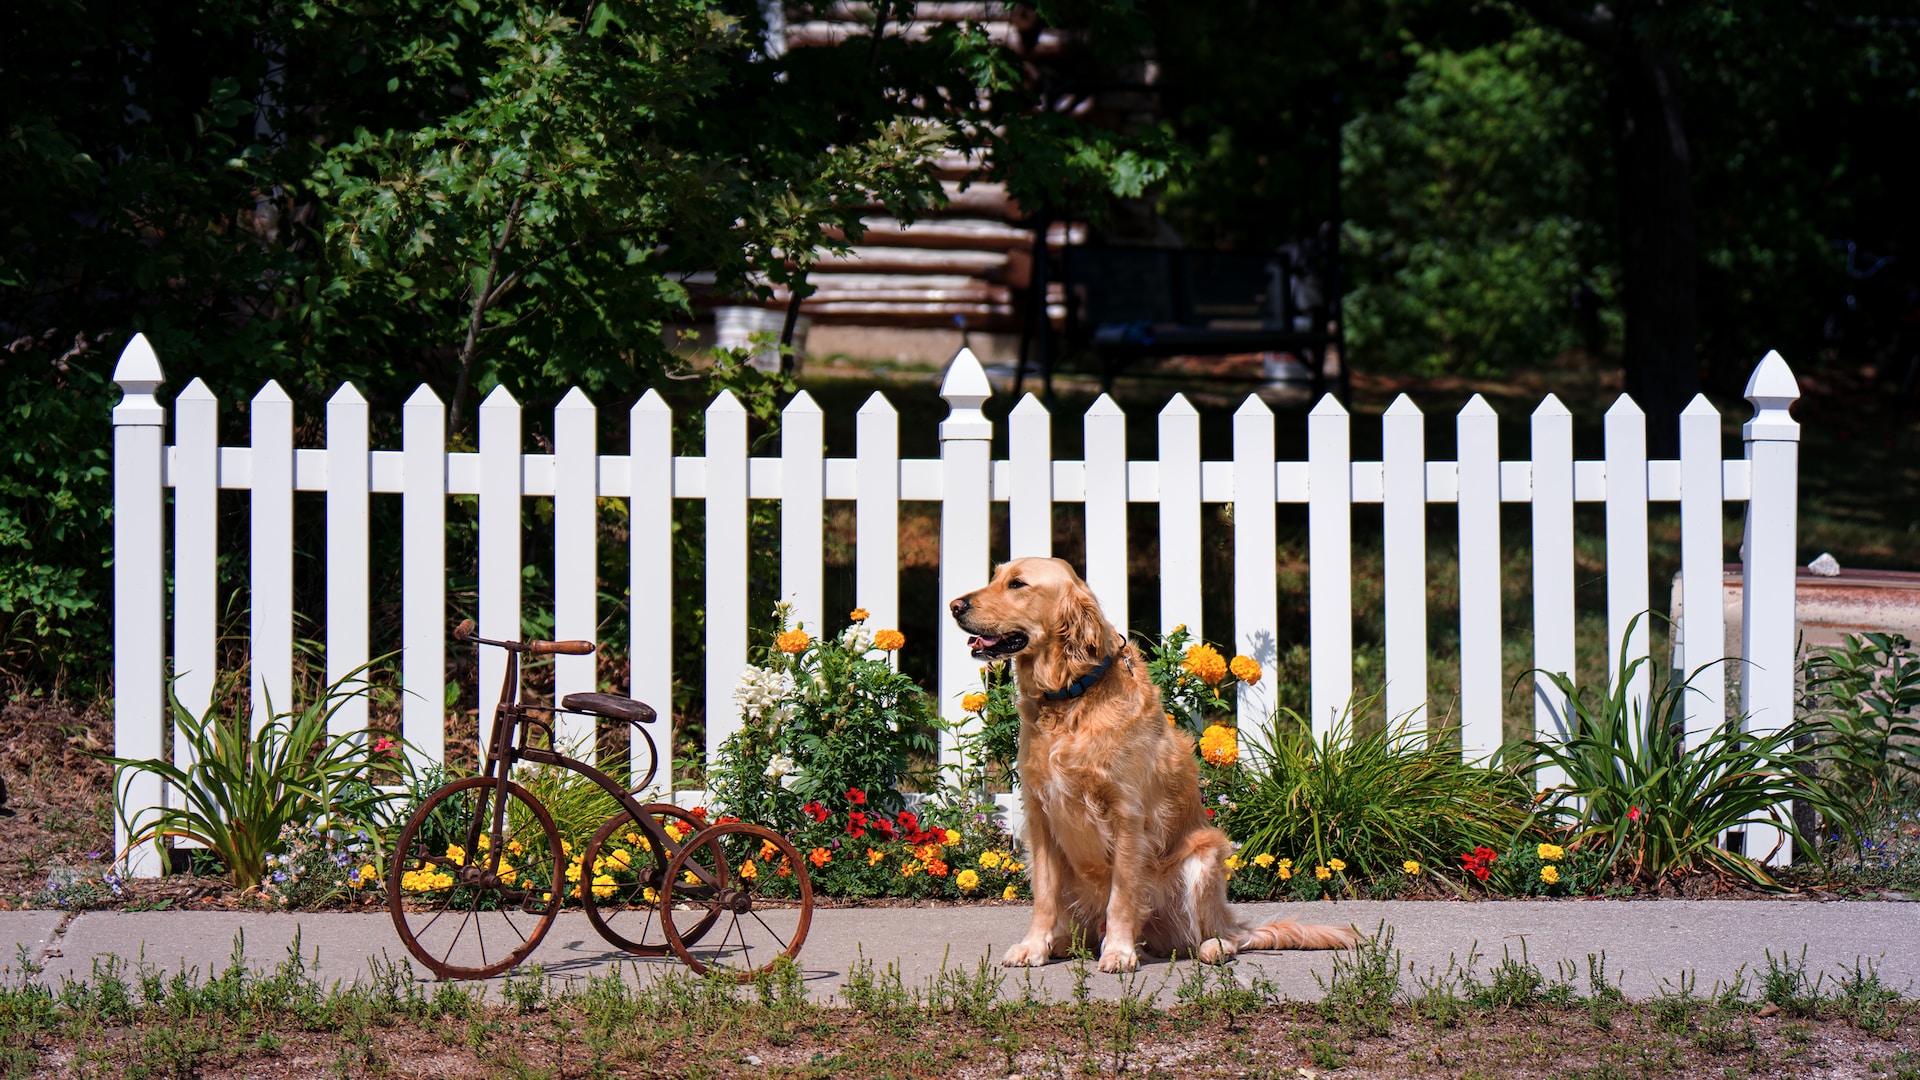 A Golden Retriever sitting in front of a white picket fence